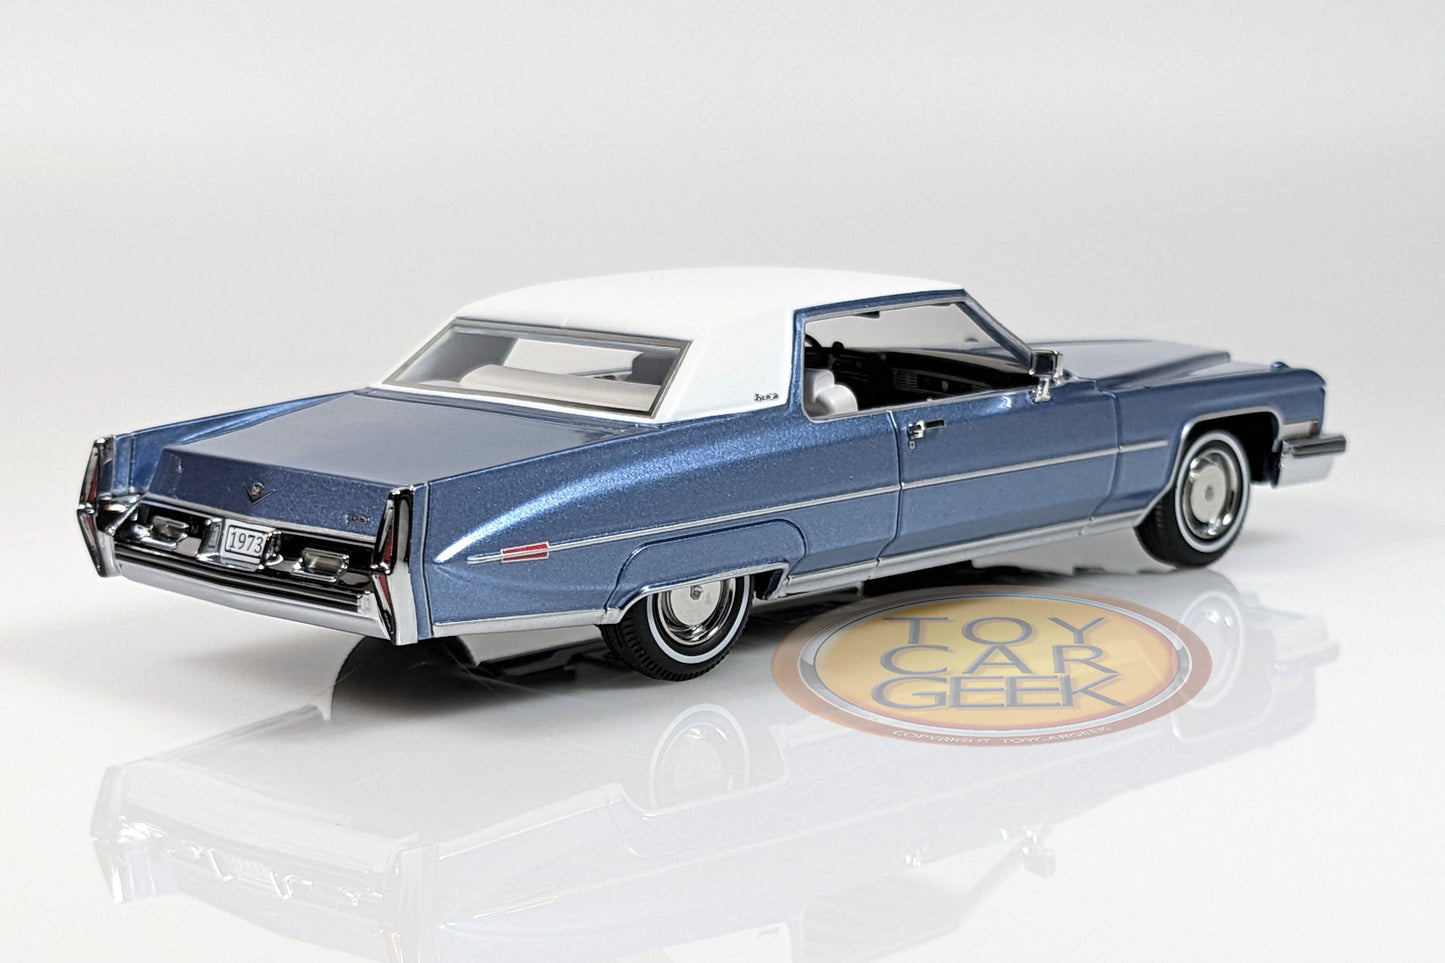 1973 Cadillac Coupe De Ville - RESERVED